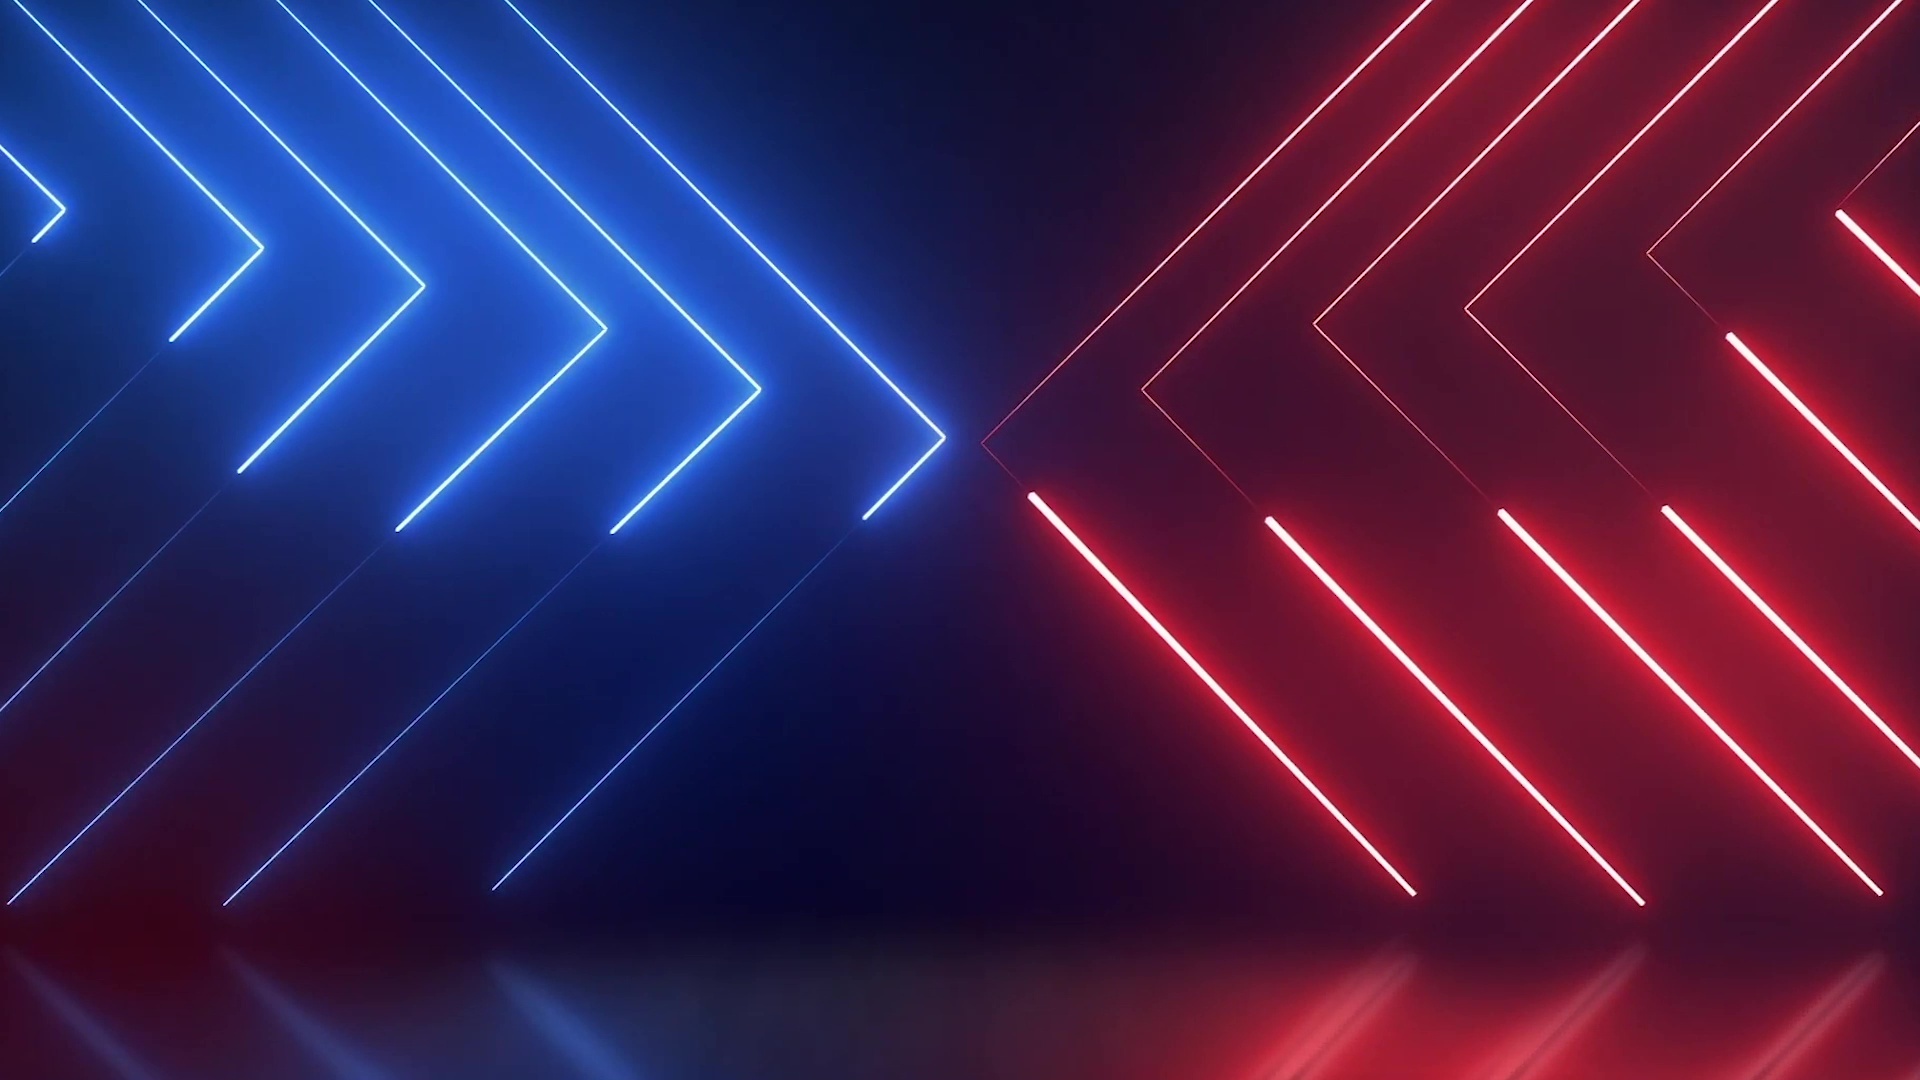 Blue and red lines, Neon colors, Live wallpaper, 1920x1080 Full HD Desktop